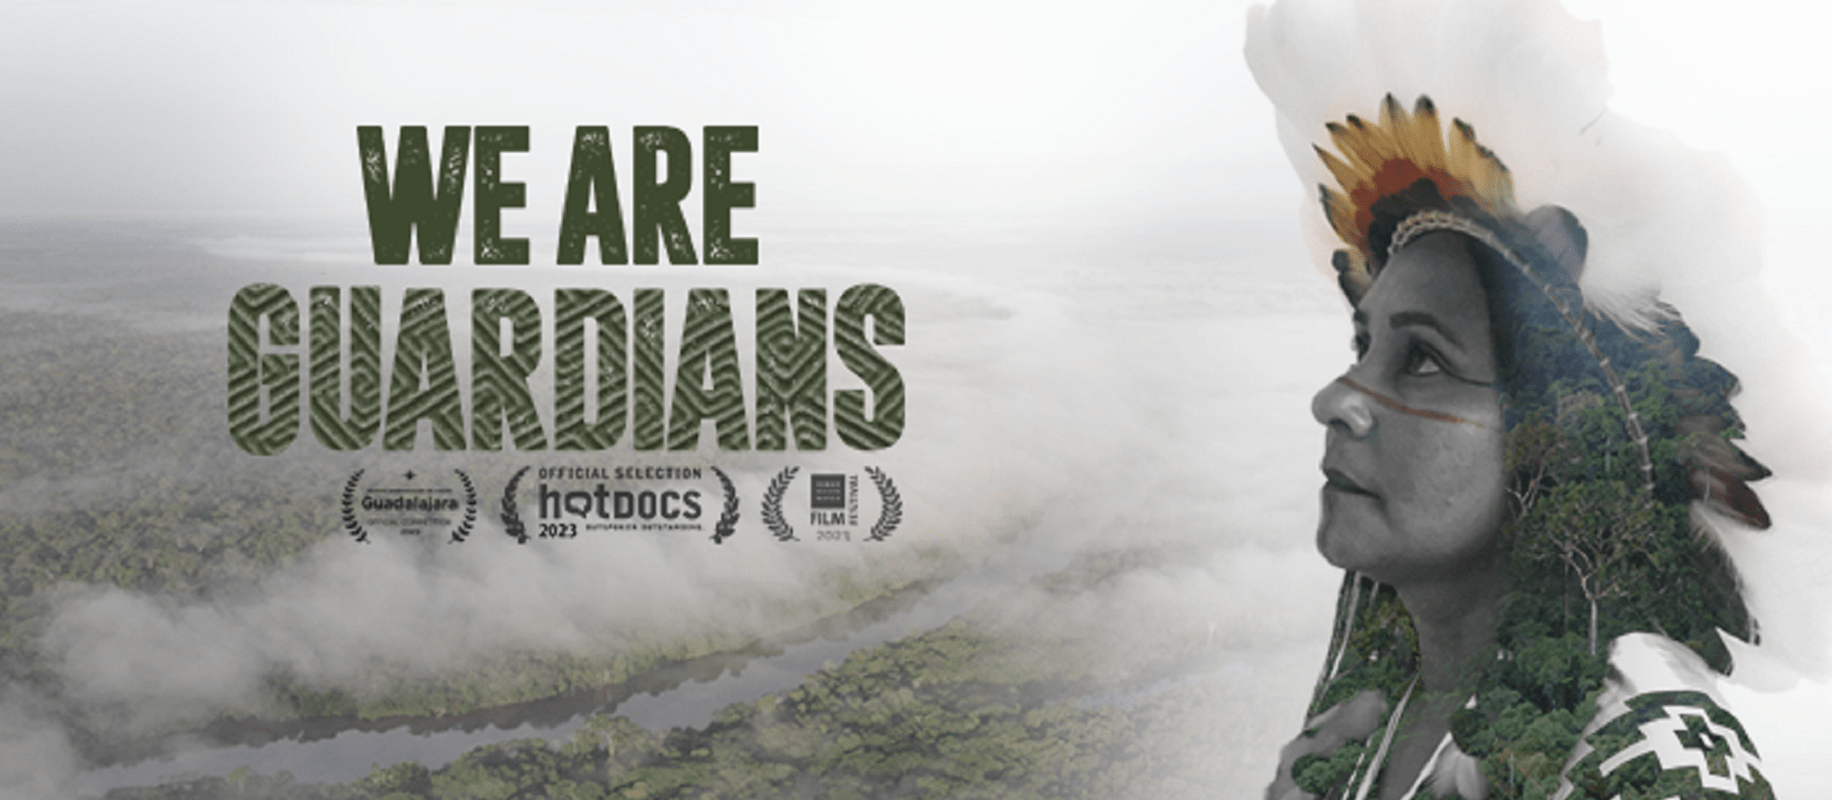 We Are Guardians – Documentary screening and Q&A with the directors